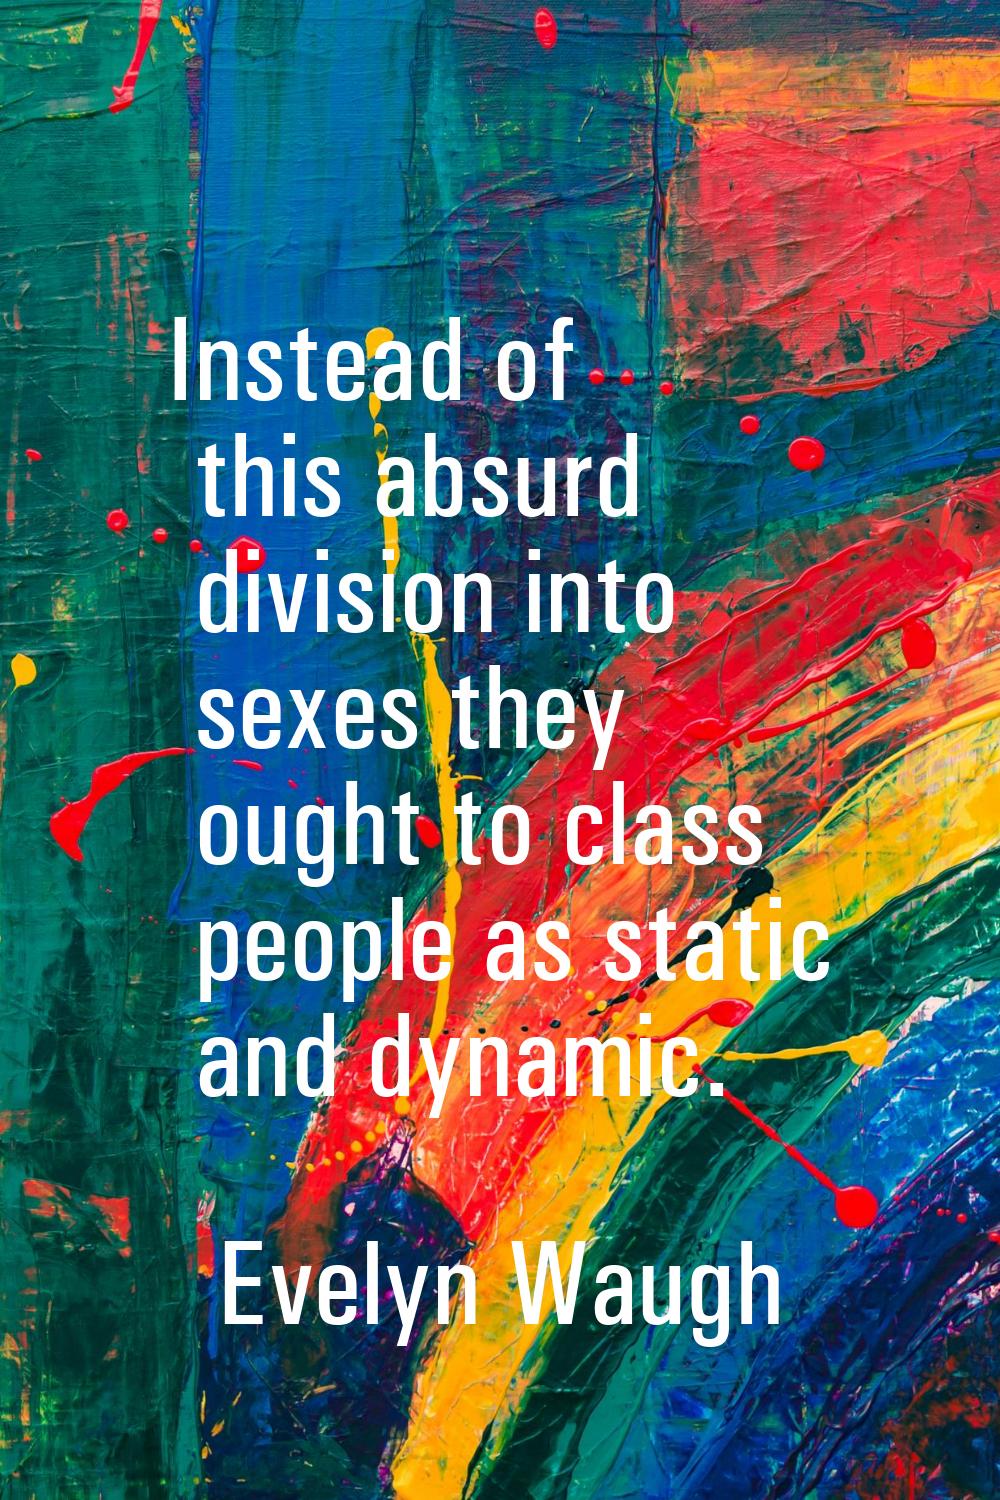 Instead of this absurd division into sexes they ought to class people as static and dynamic.